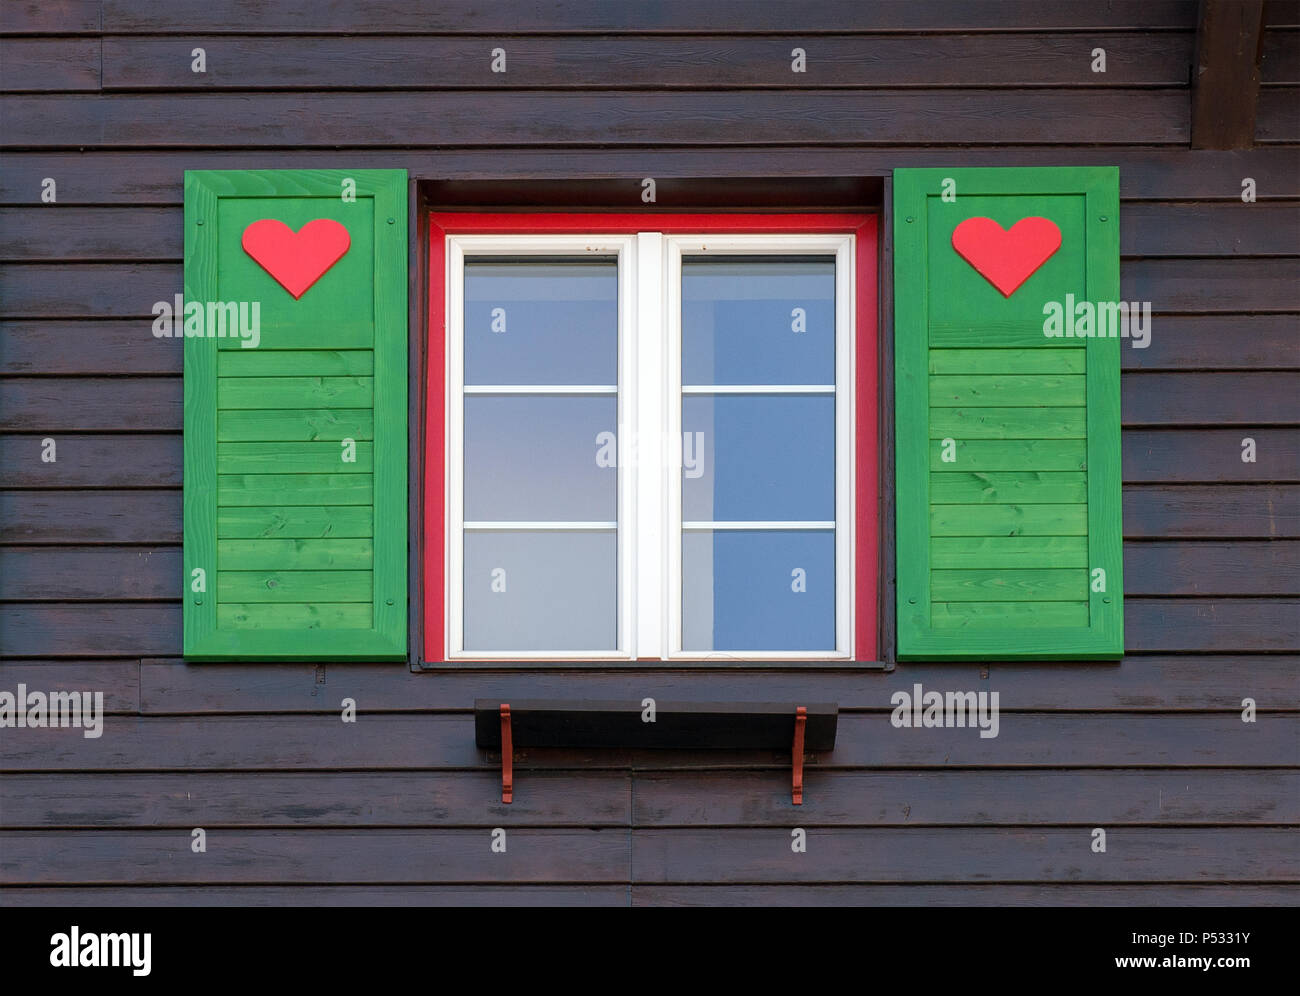 Heart symbols on the windows of a house Stock Photo